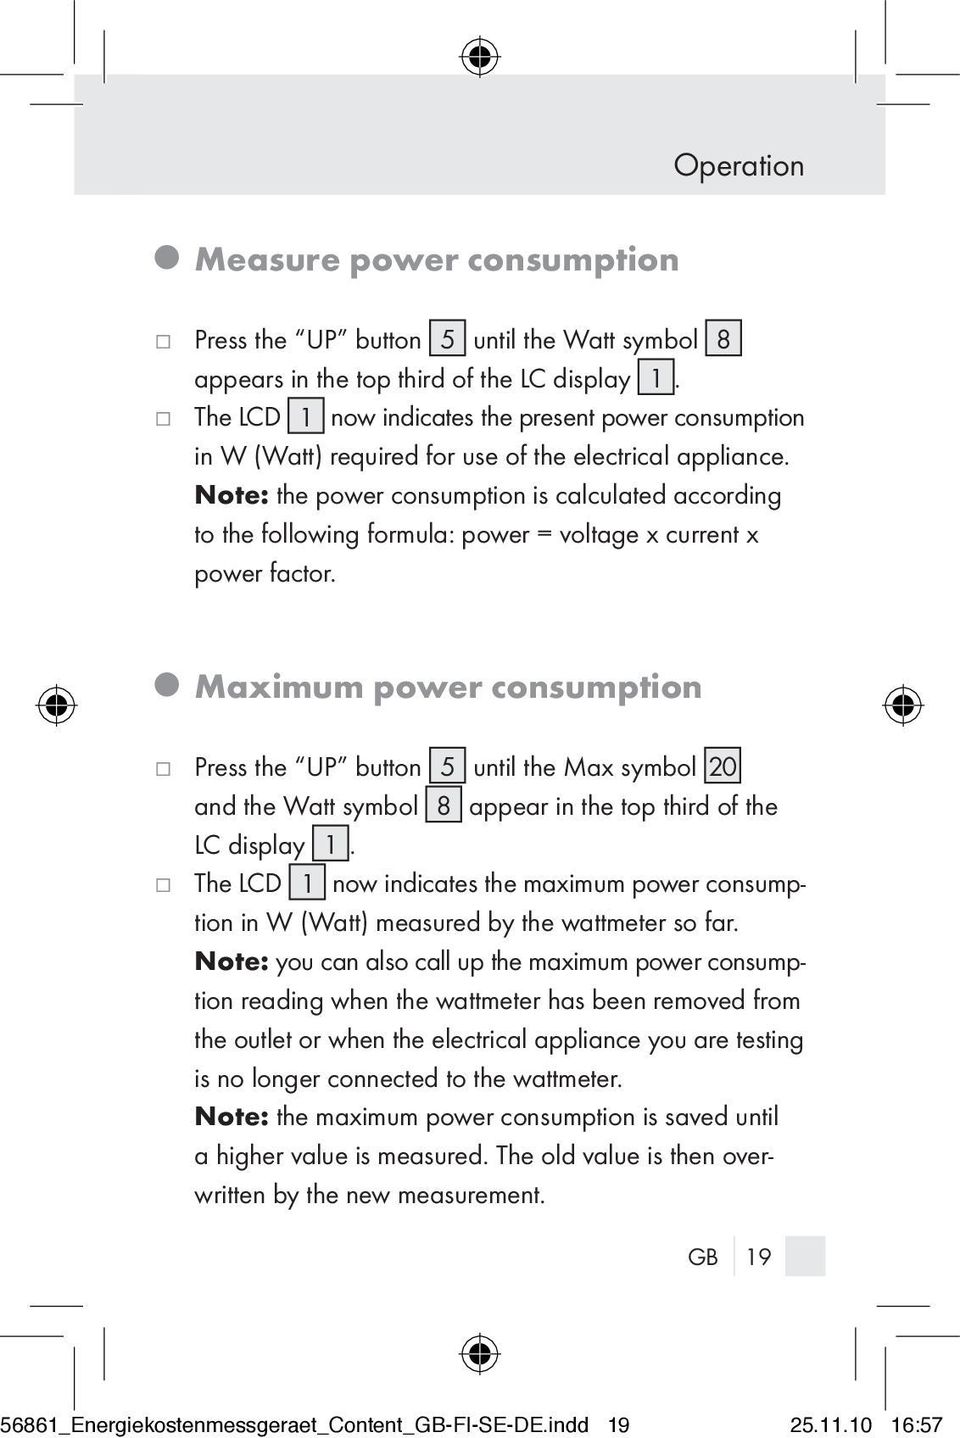 Note: the power consumption is calculated according to the following formula: power = voltage x current x power factor.